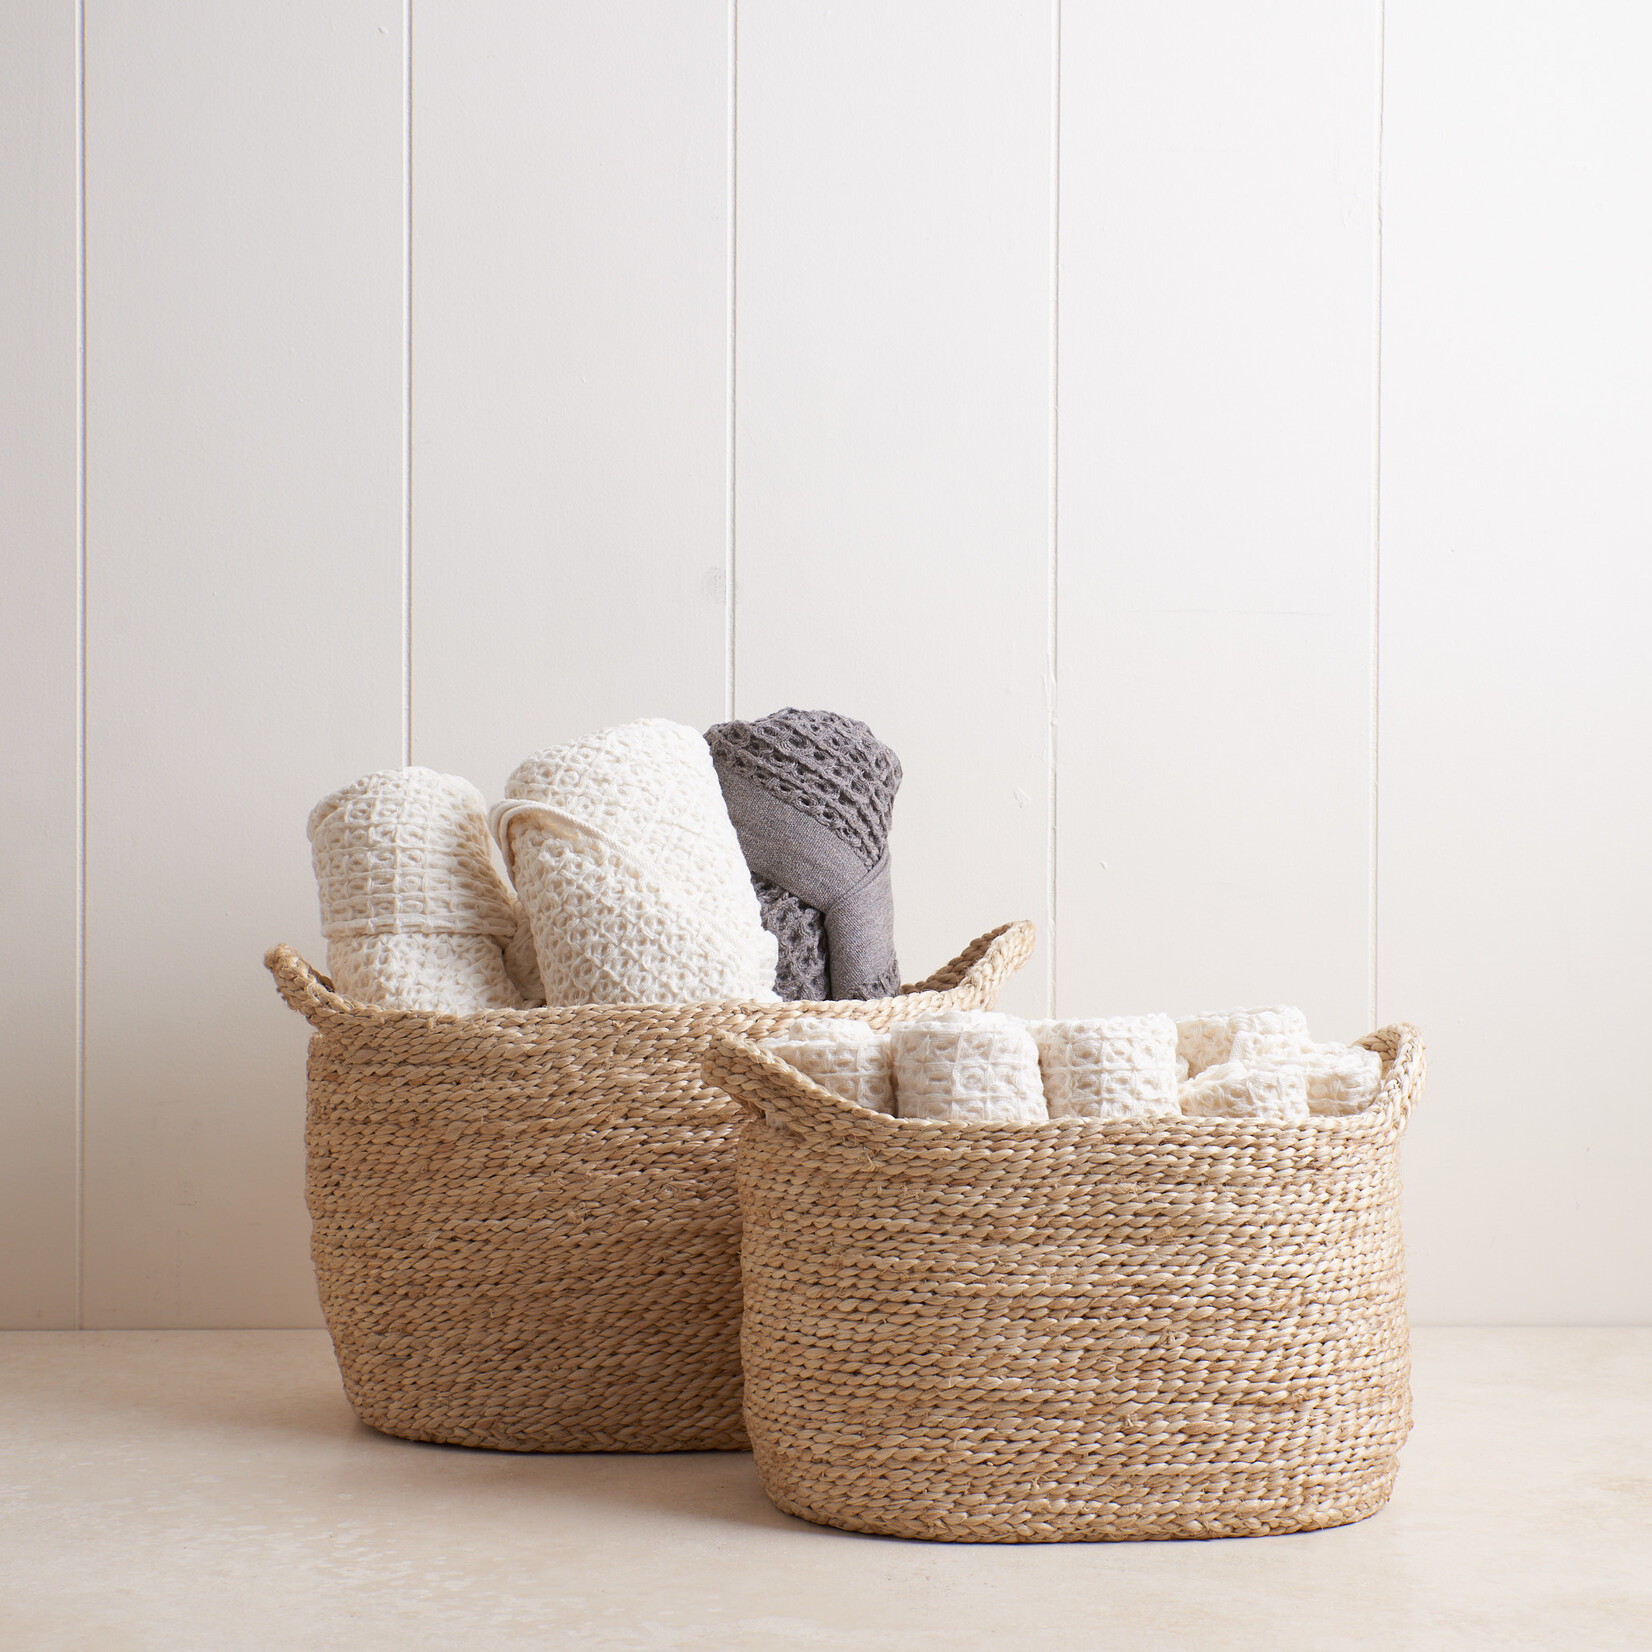 Small Oval Jute Basket - natural